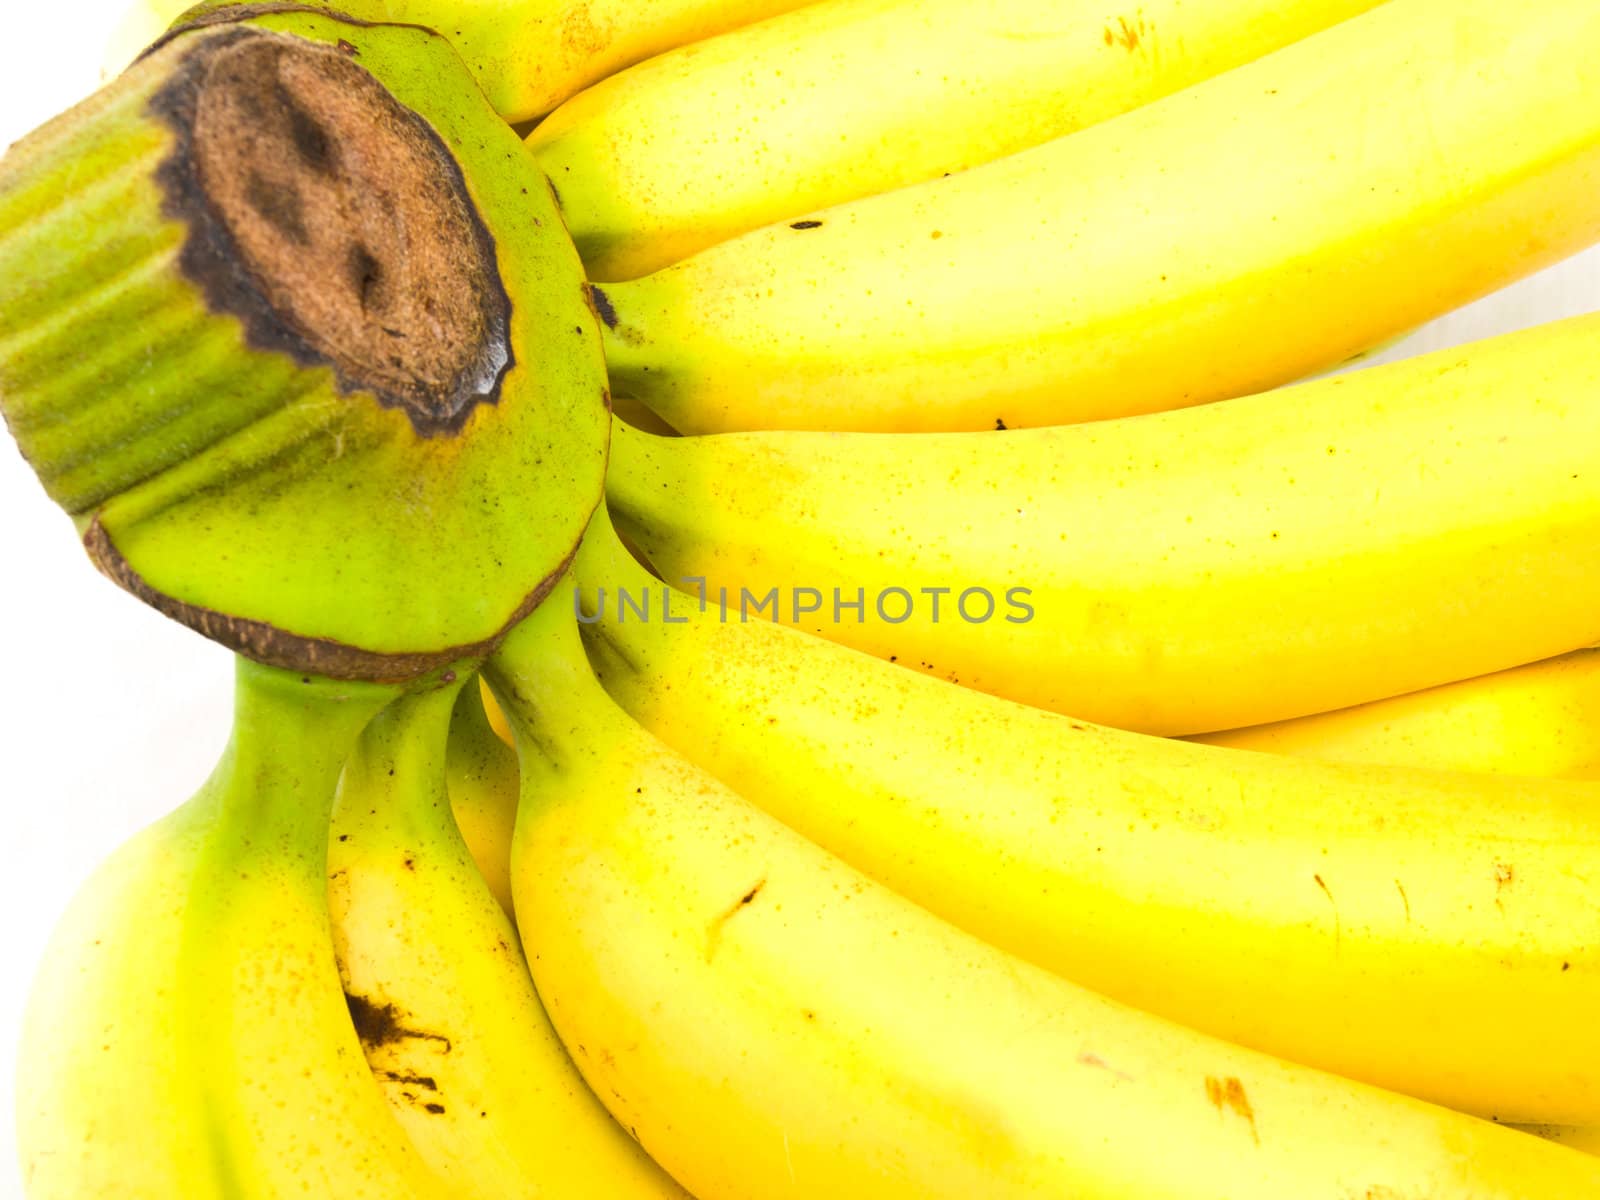 A bunch of ripe banansa isolated on white background